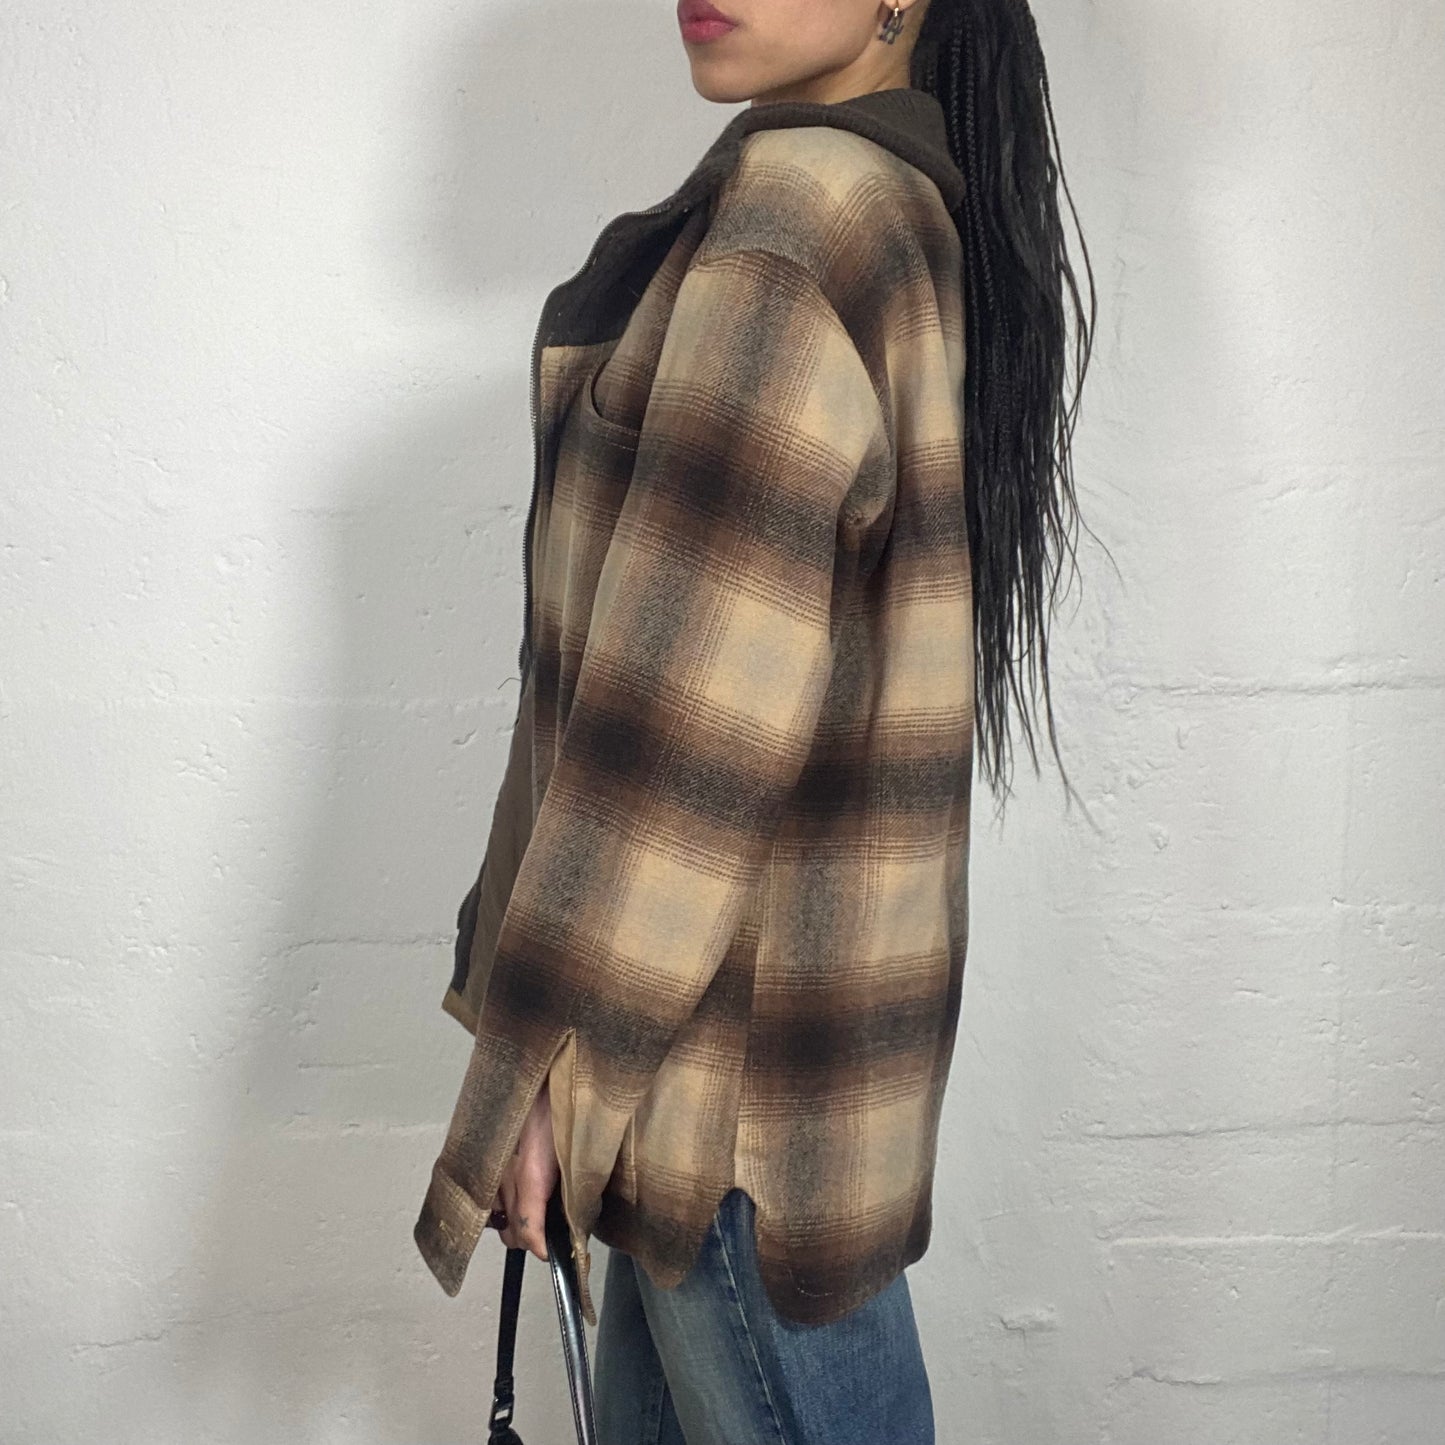 Vintage 90's Casual Brown and Beige Zip Up Jacket with Checkered Print (M)